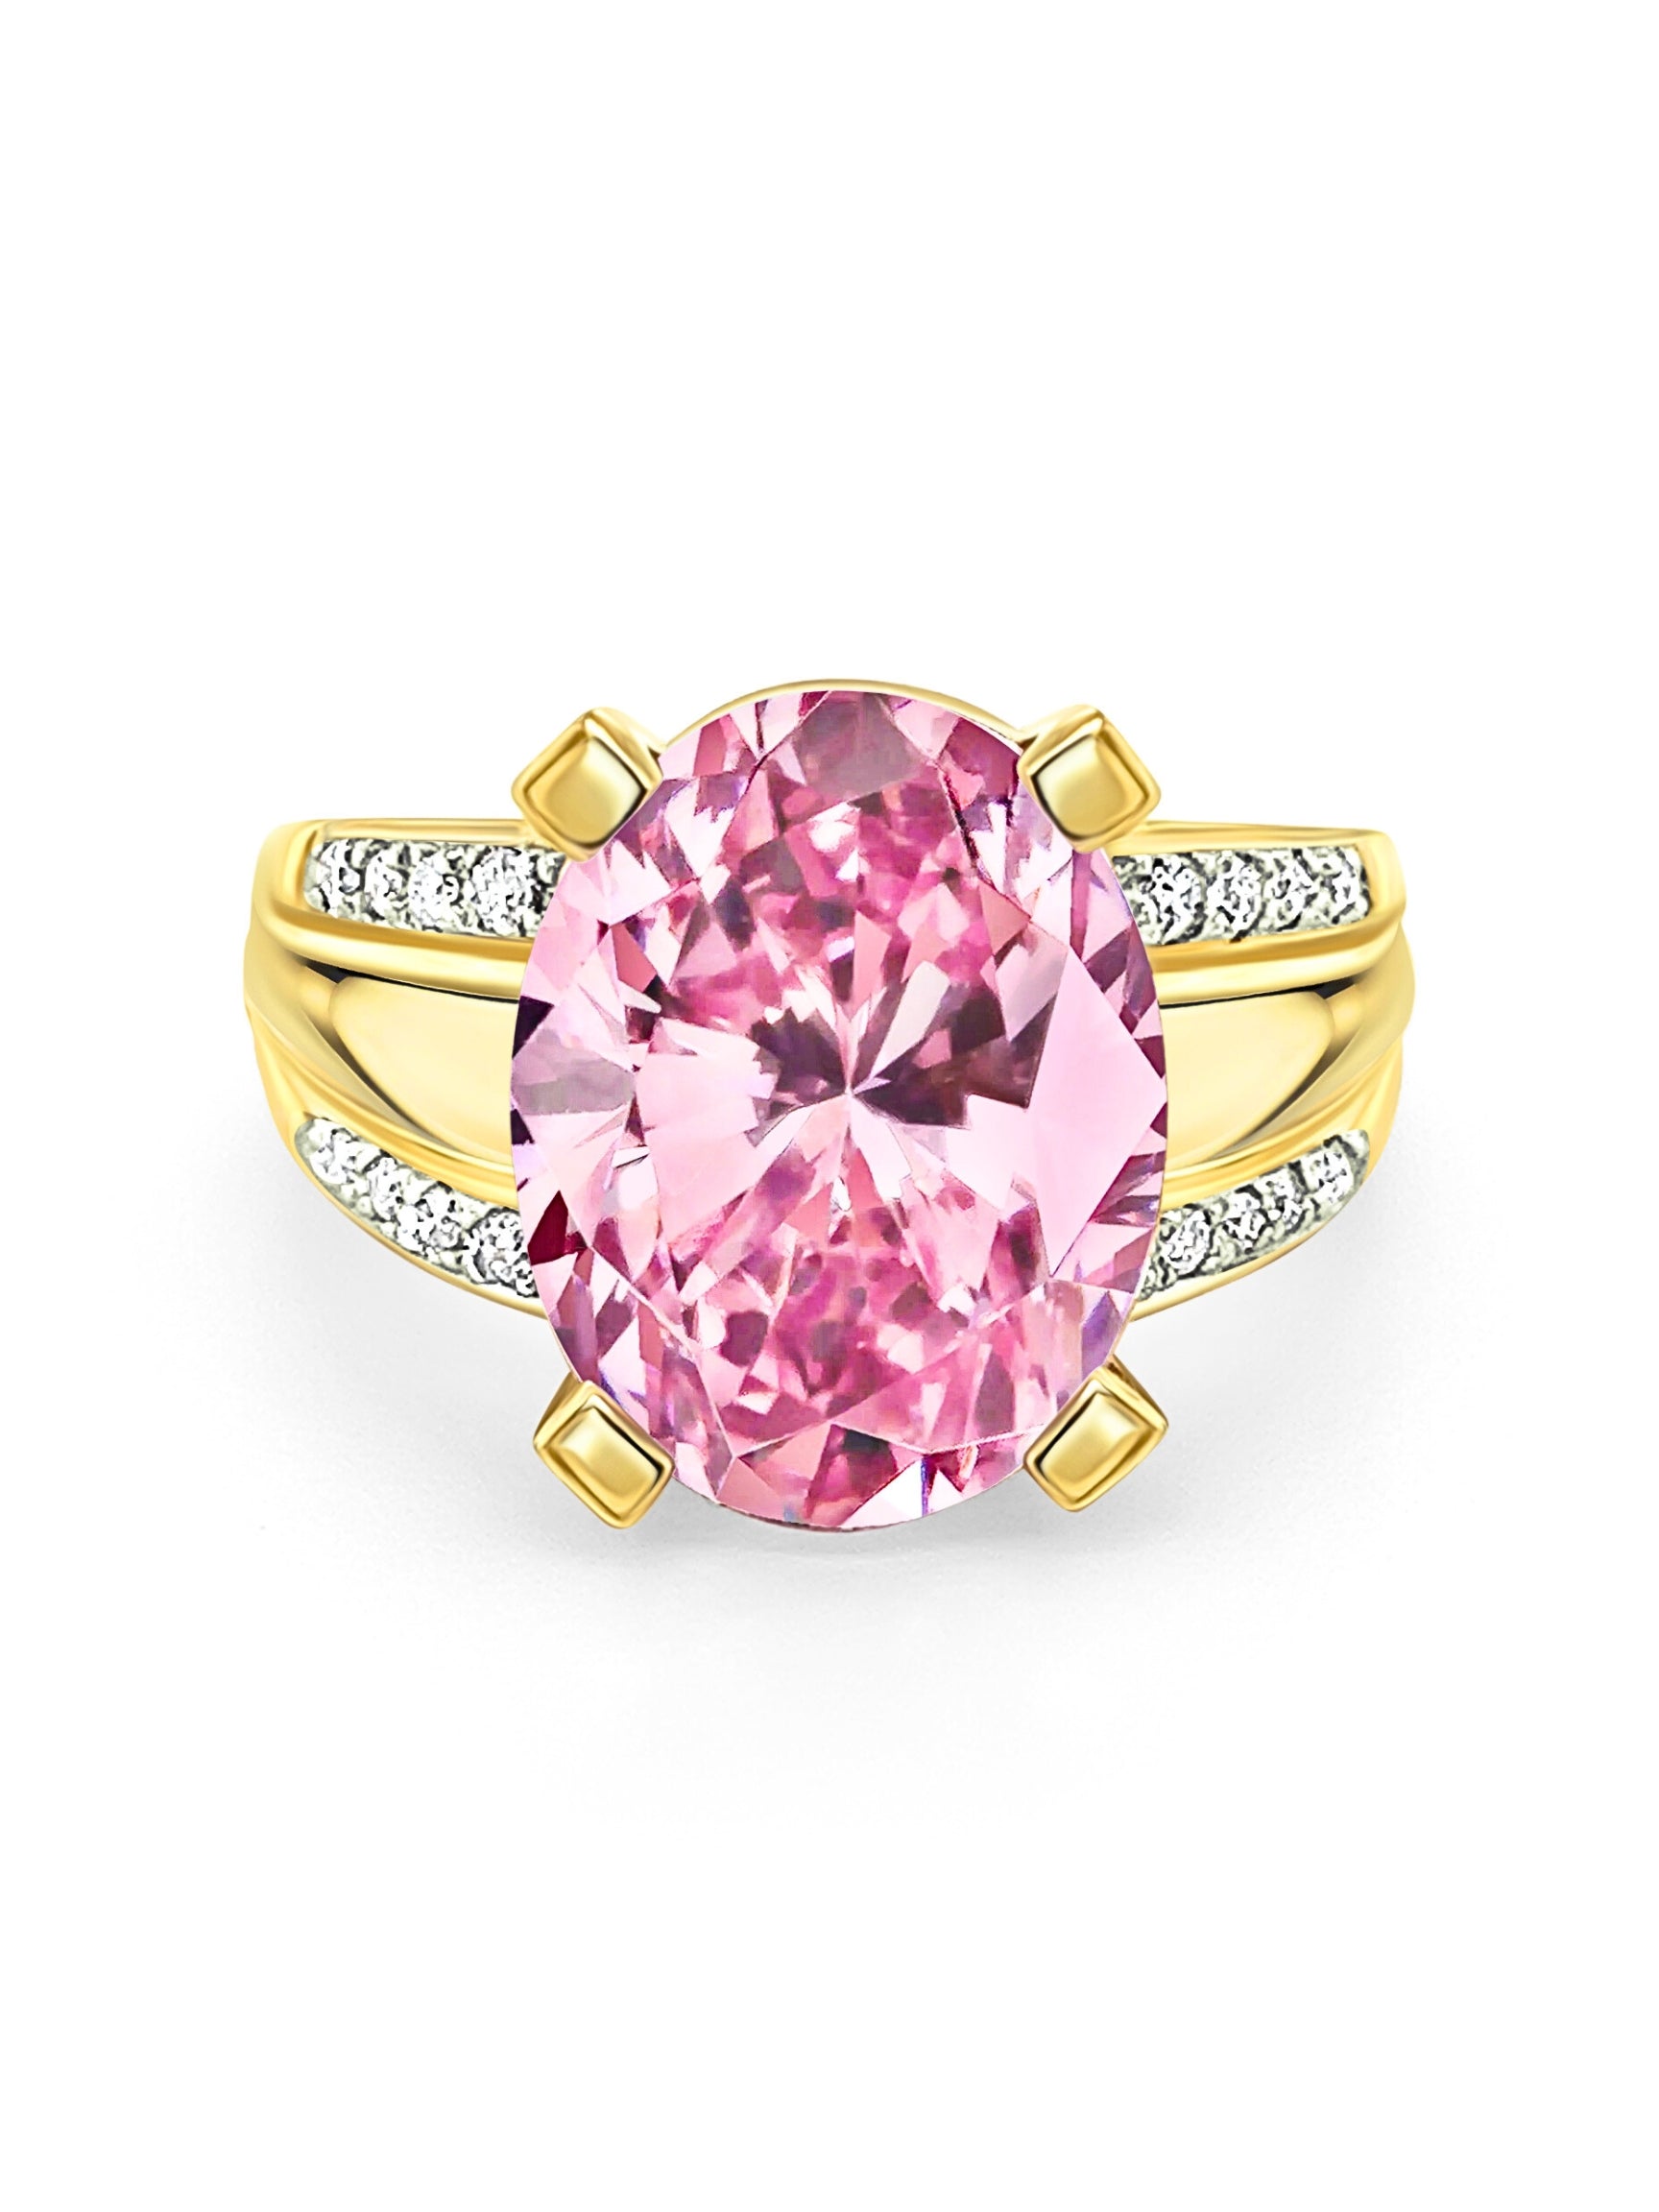 Vintage-9_50-Carat-Oval-Cut-Pink-Kunzite-with-Diamond-Side-Stone-Cocktail-Ring-in-18K-Yellow-Gold-Semi-Precious-Jewelry.jpg